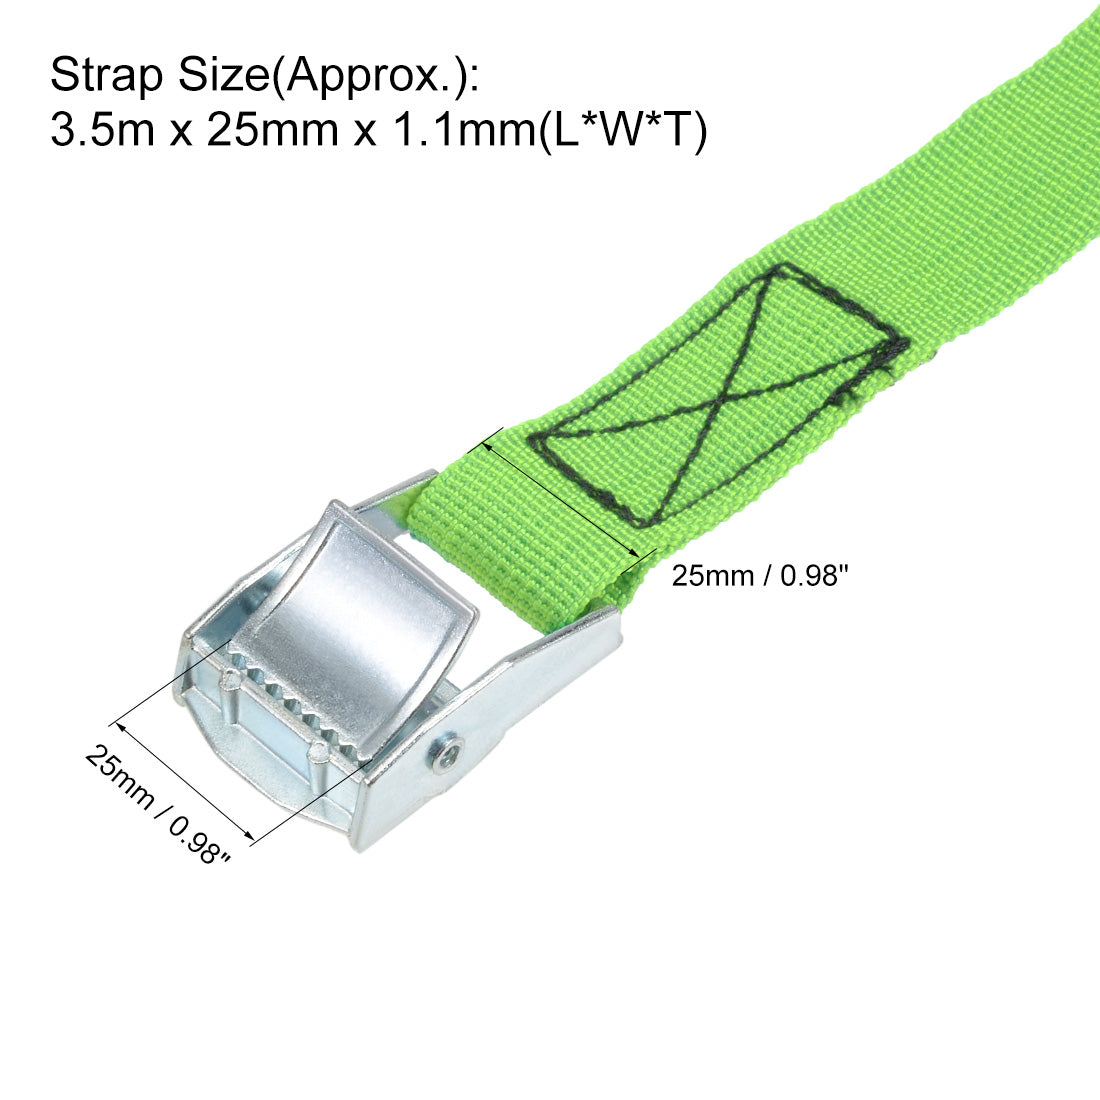 uxcell Uxcell Lashing Strap 1" x 11' Cargo Tie Down Straps with Cam Lock Buckle Up to 551lbs Green 4pcs